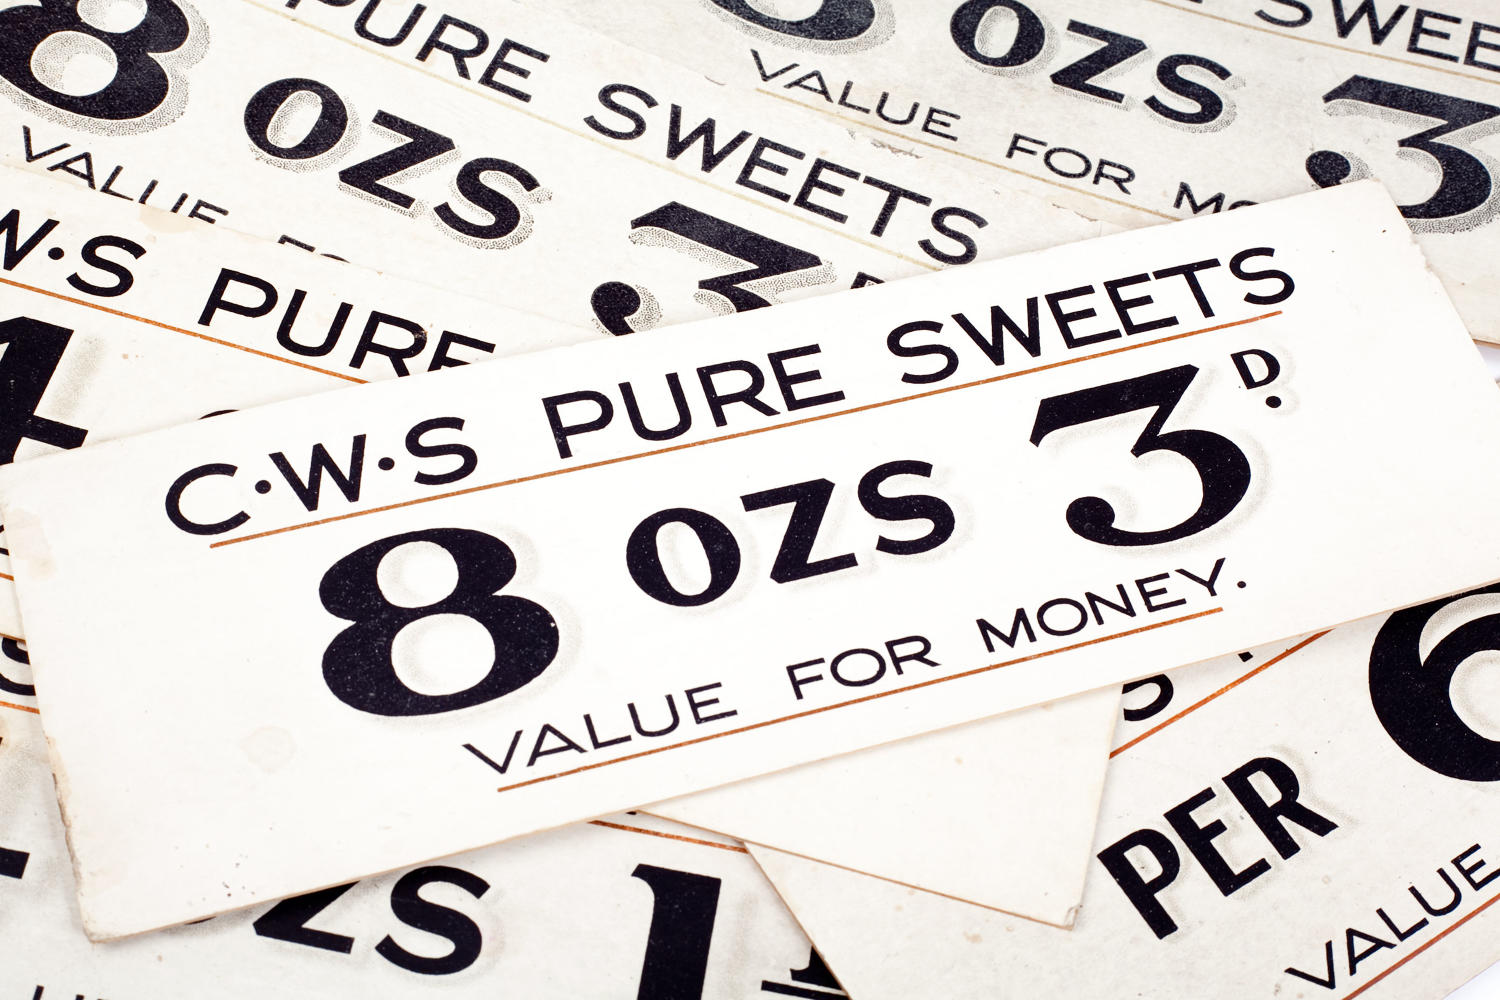 Vintage price labels for 'C.W.S Pure Sweets'